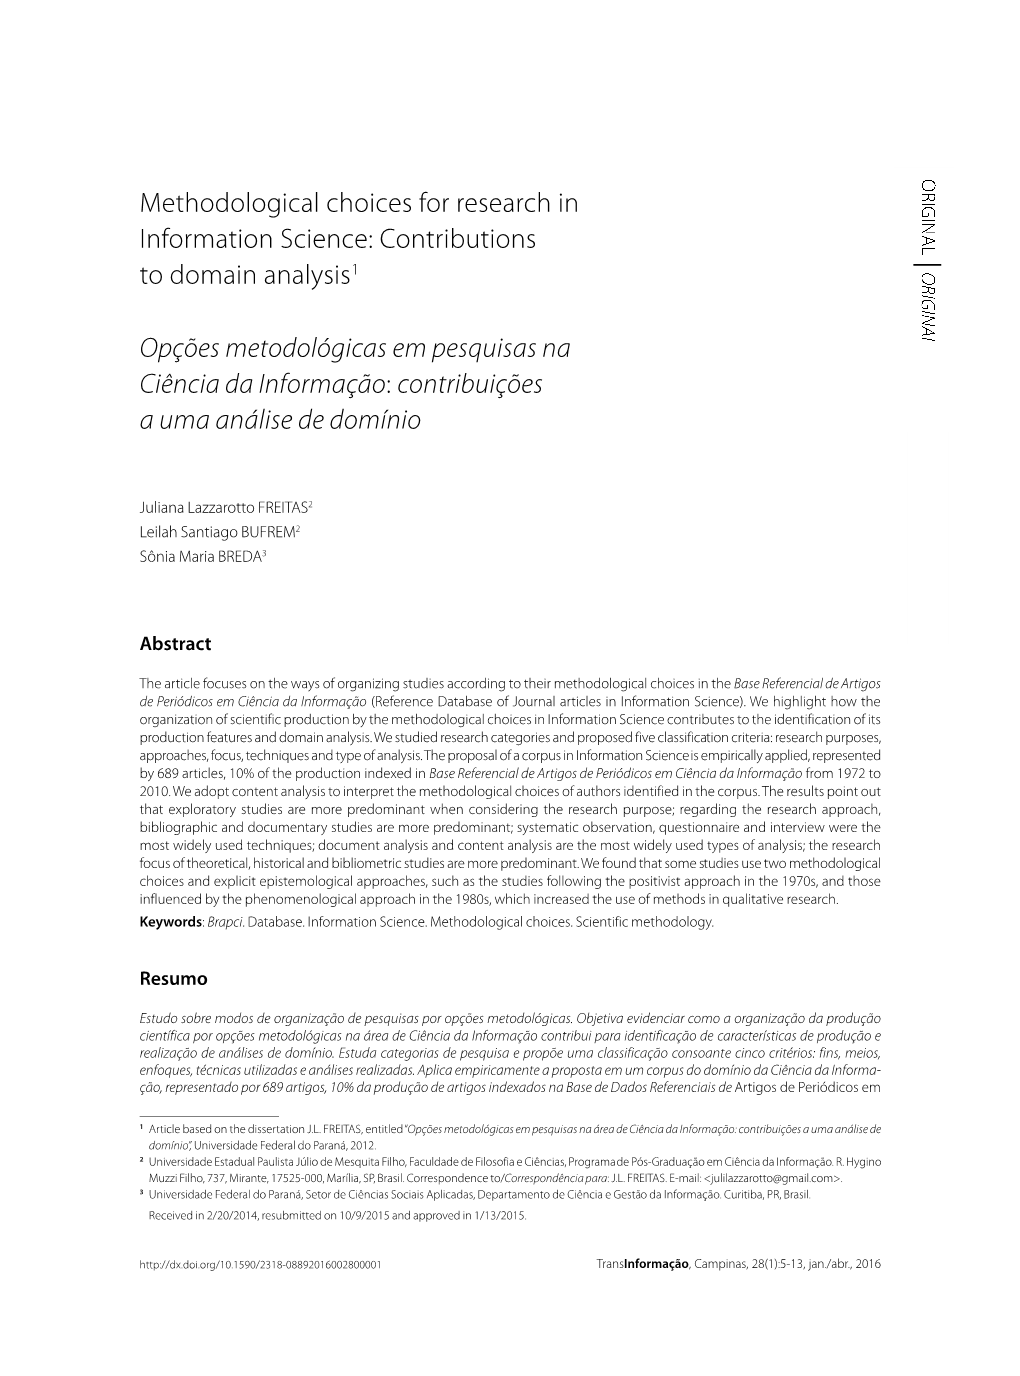 Methodological Choices for Research in Information Science